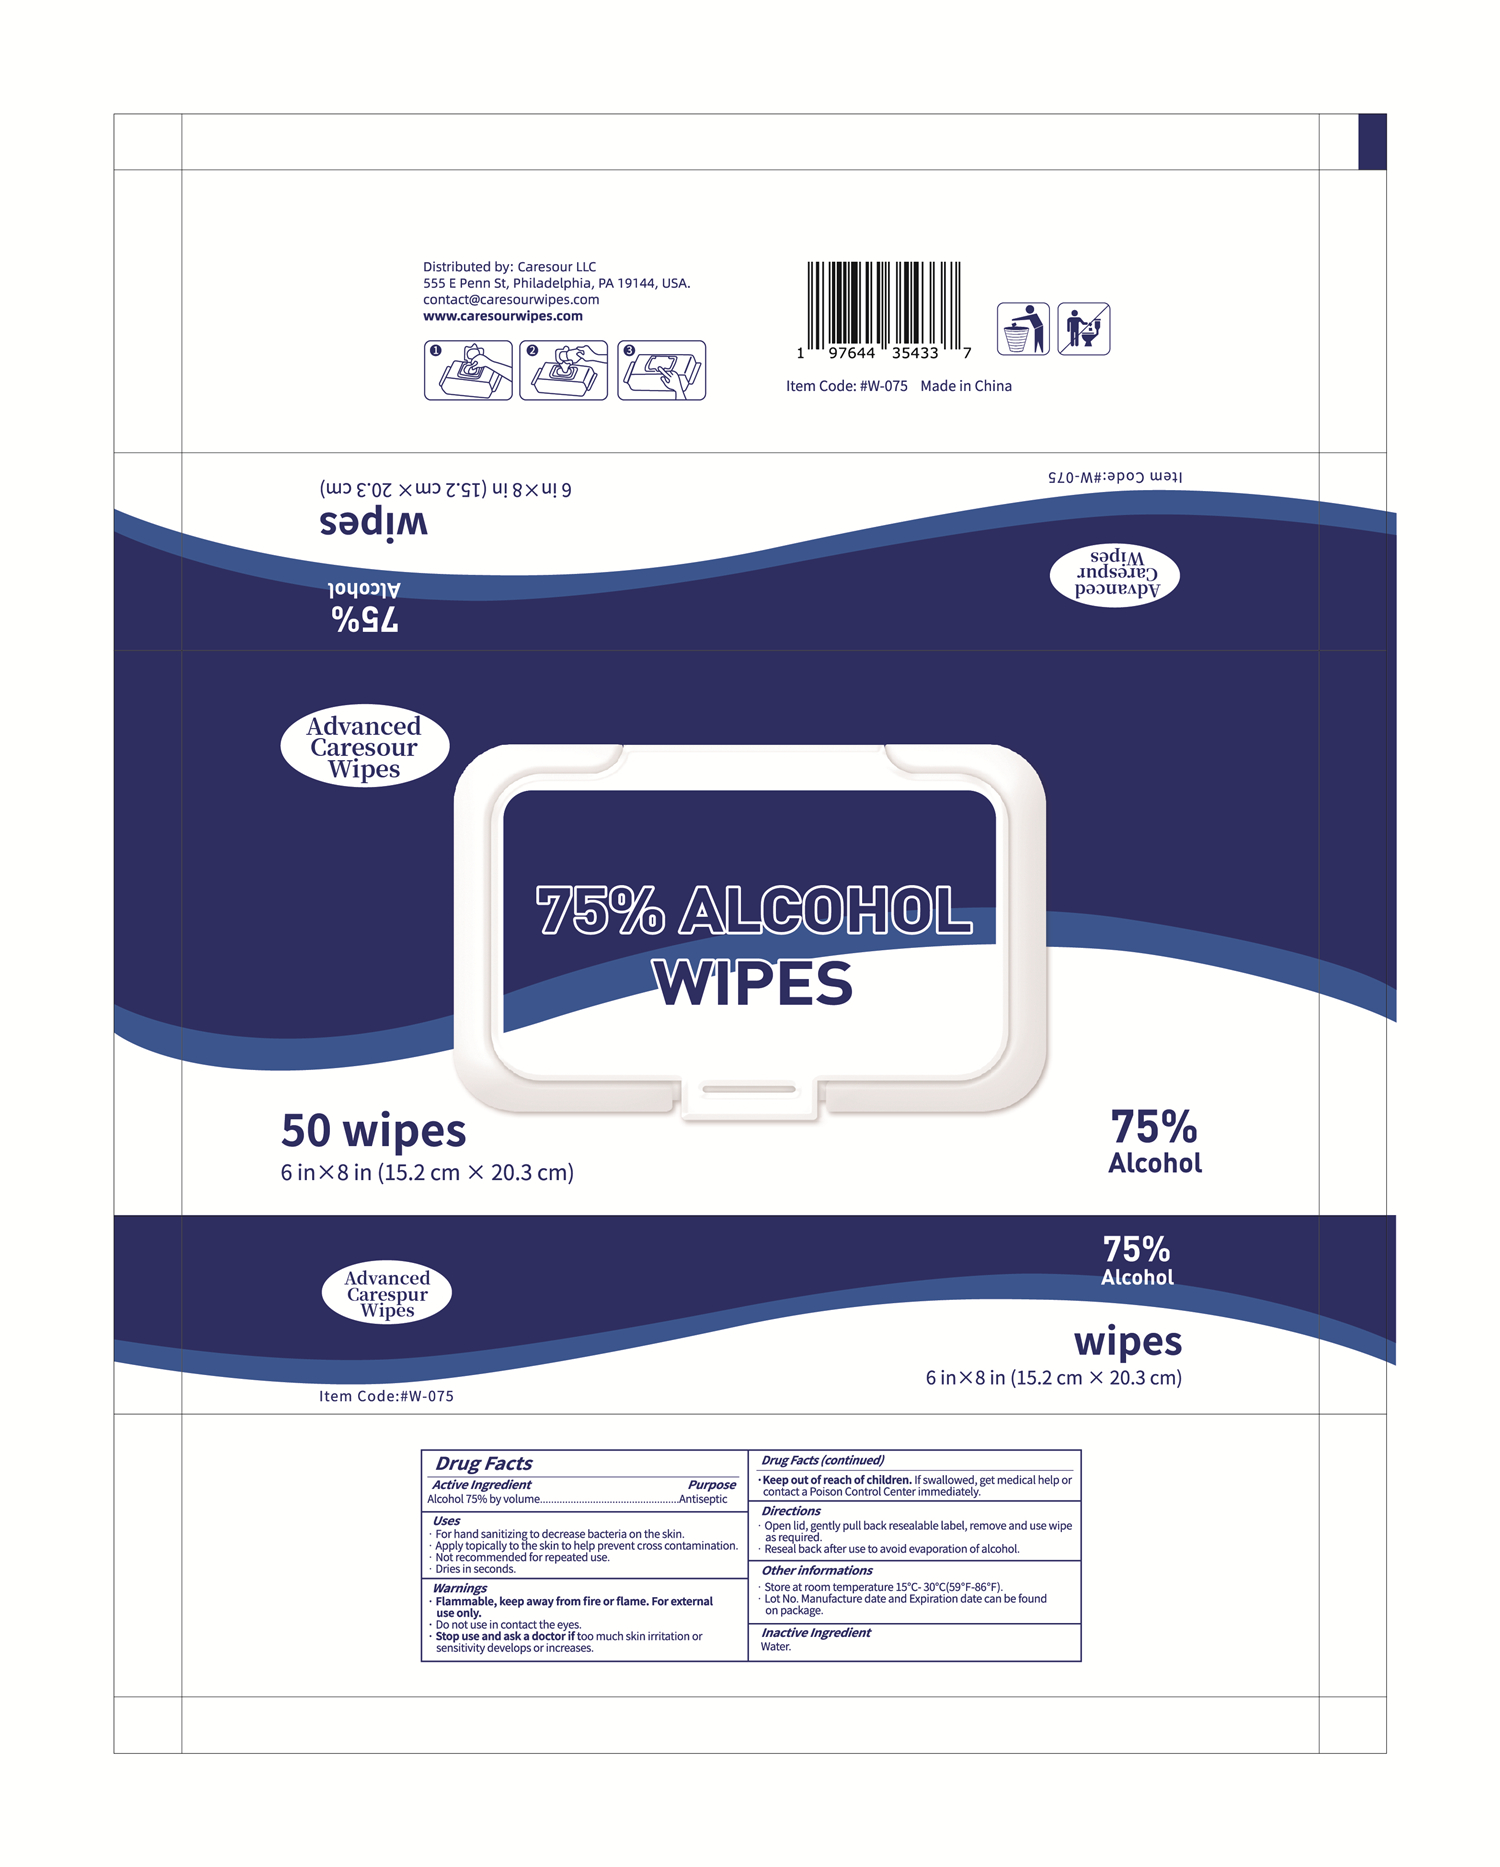 Advanced Caresour Wipes Label